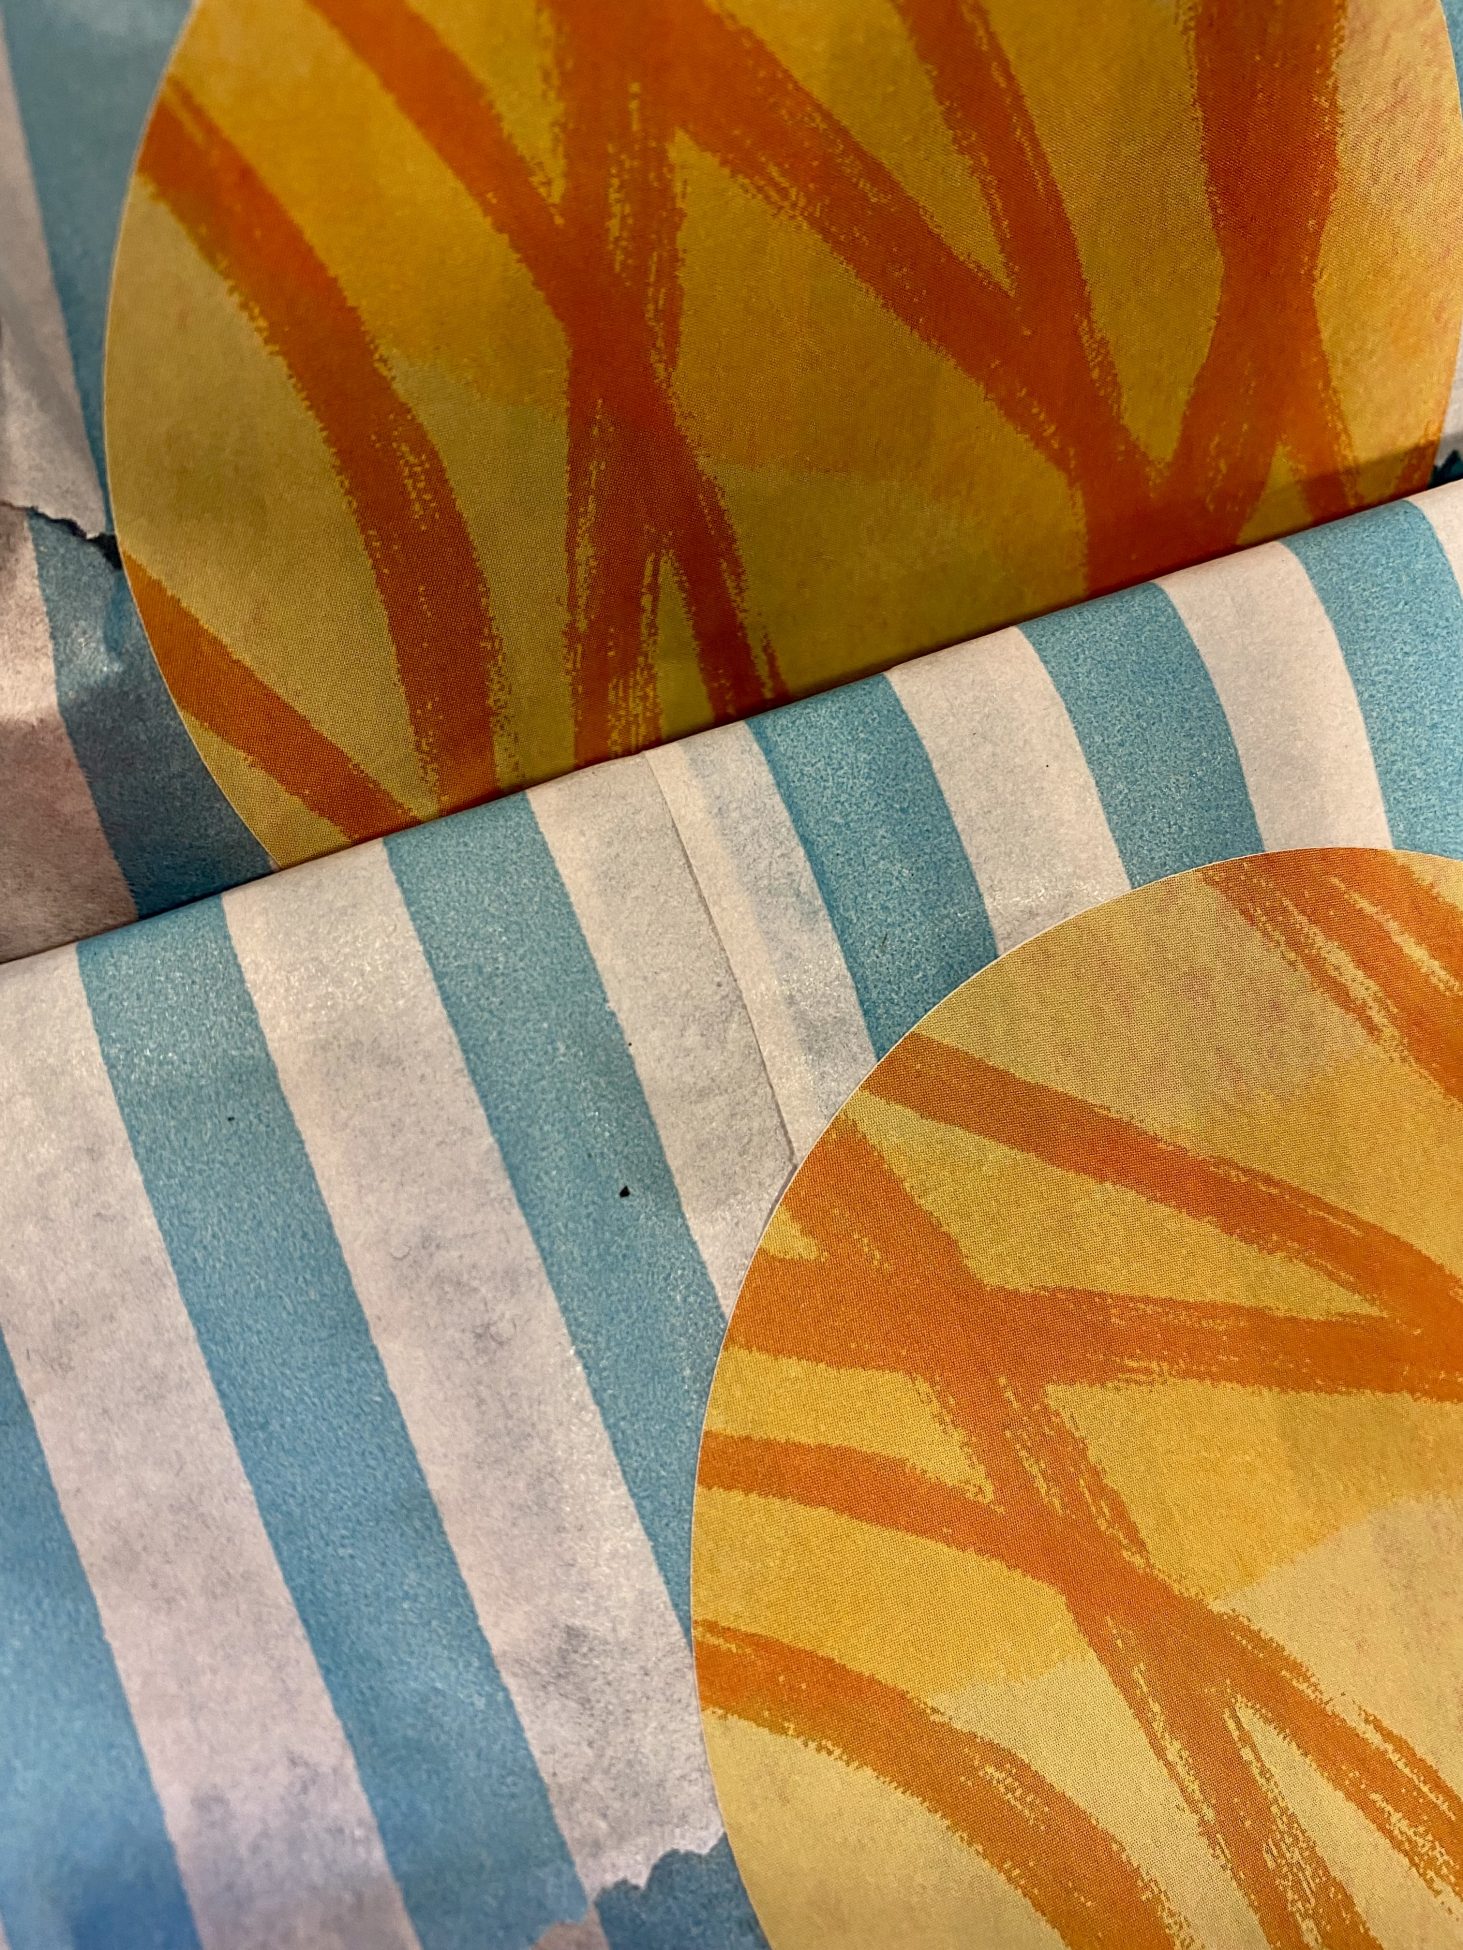 A close up photo of filled blue and white striped paper bags. The top of each bag has been folded over and sealed with a round orange sticker with abstract darker orange lines drawn across it.